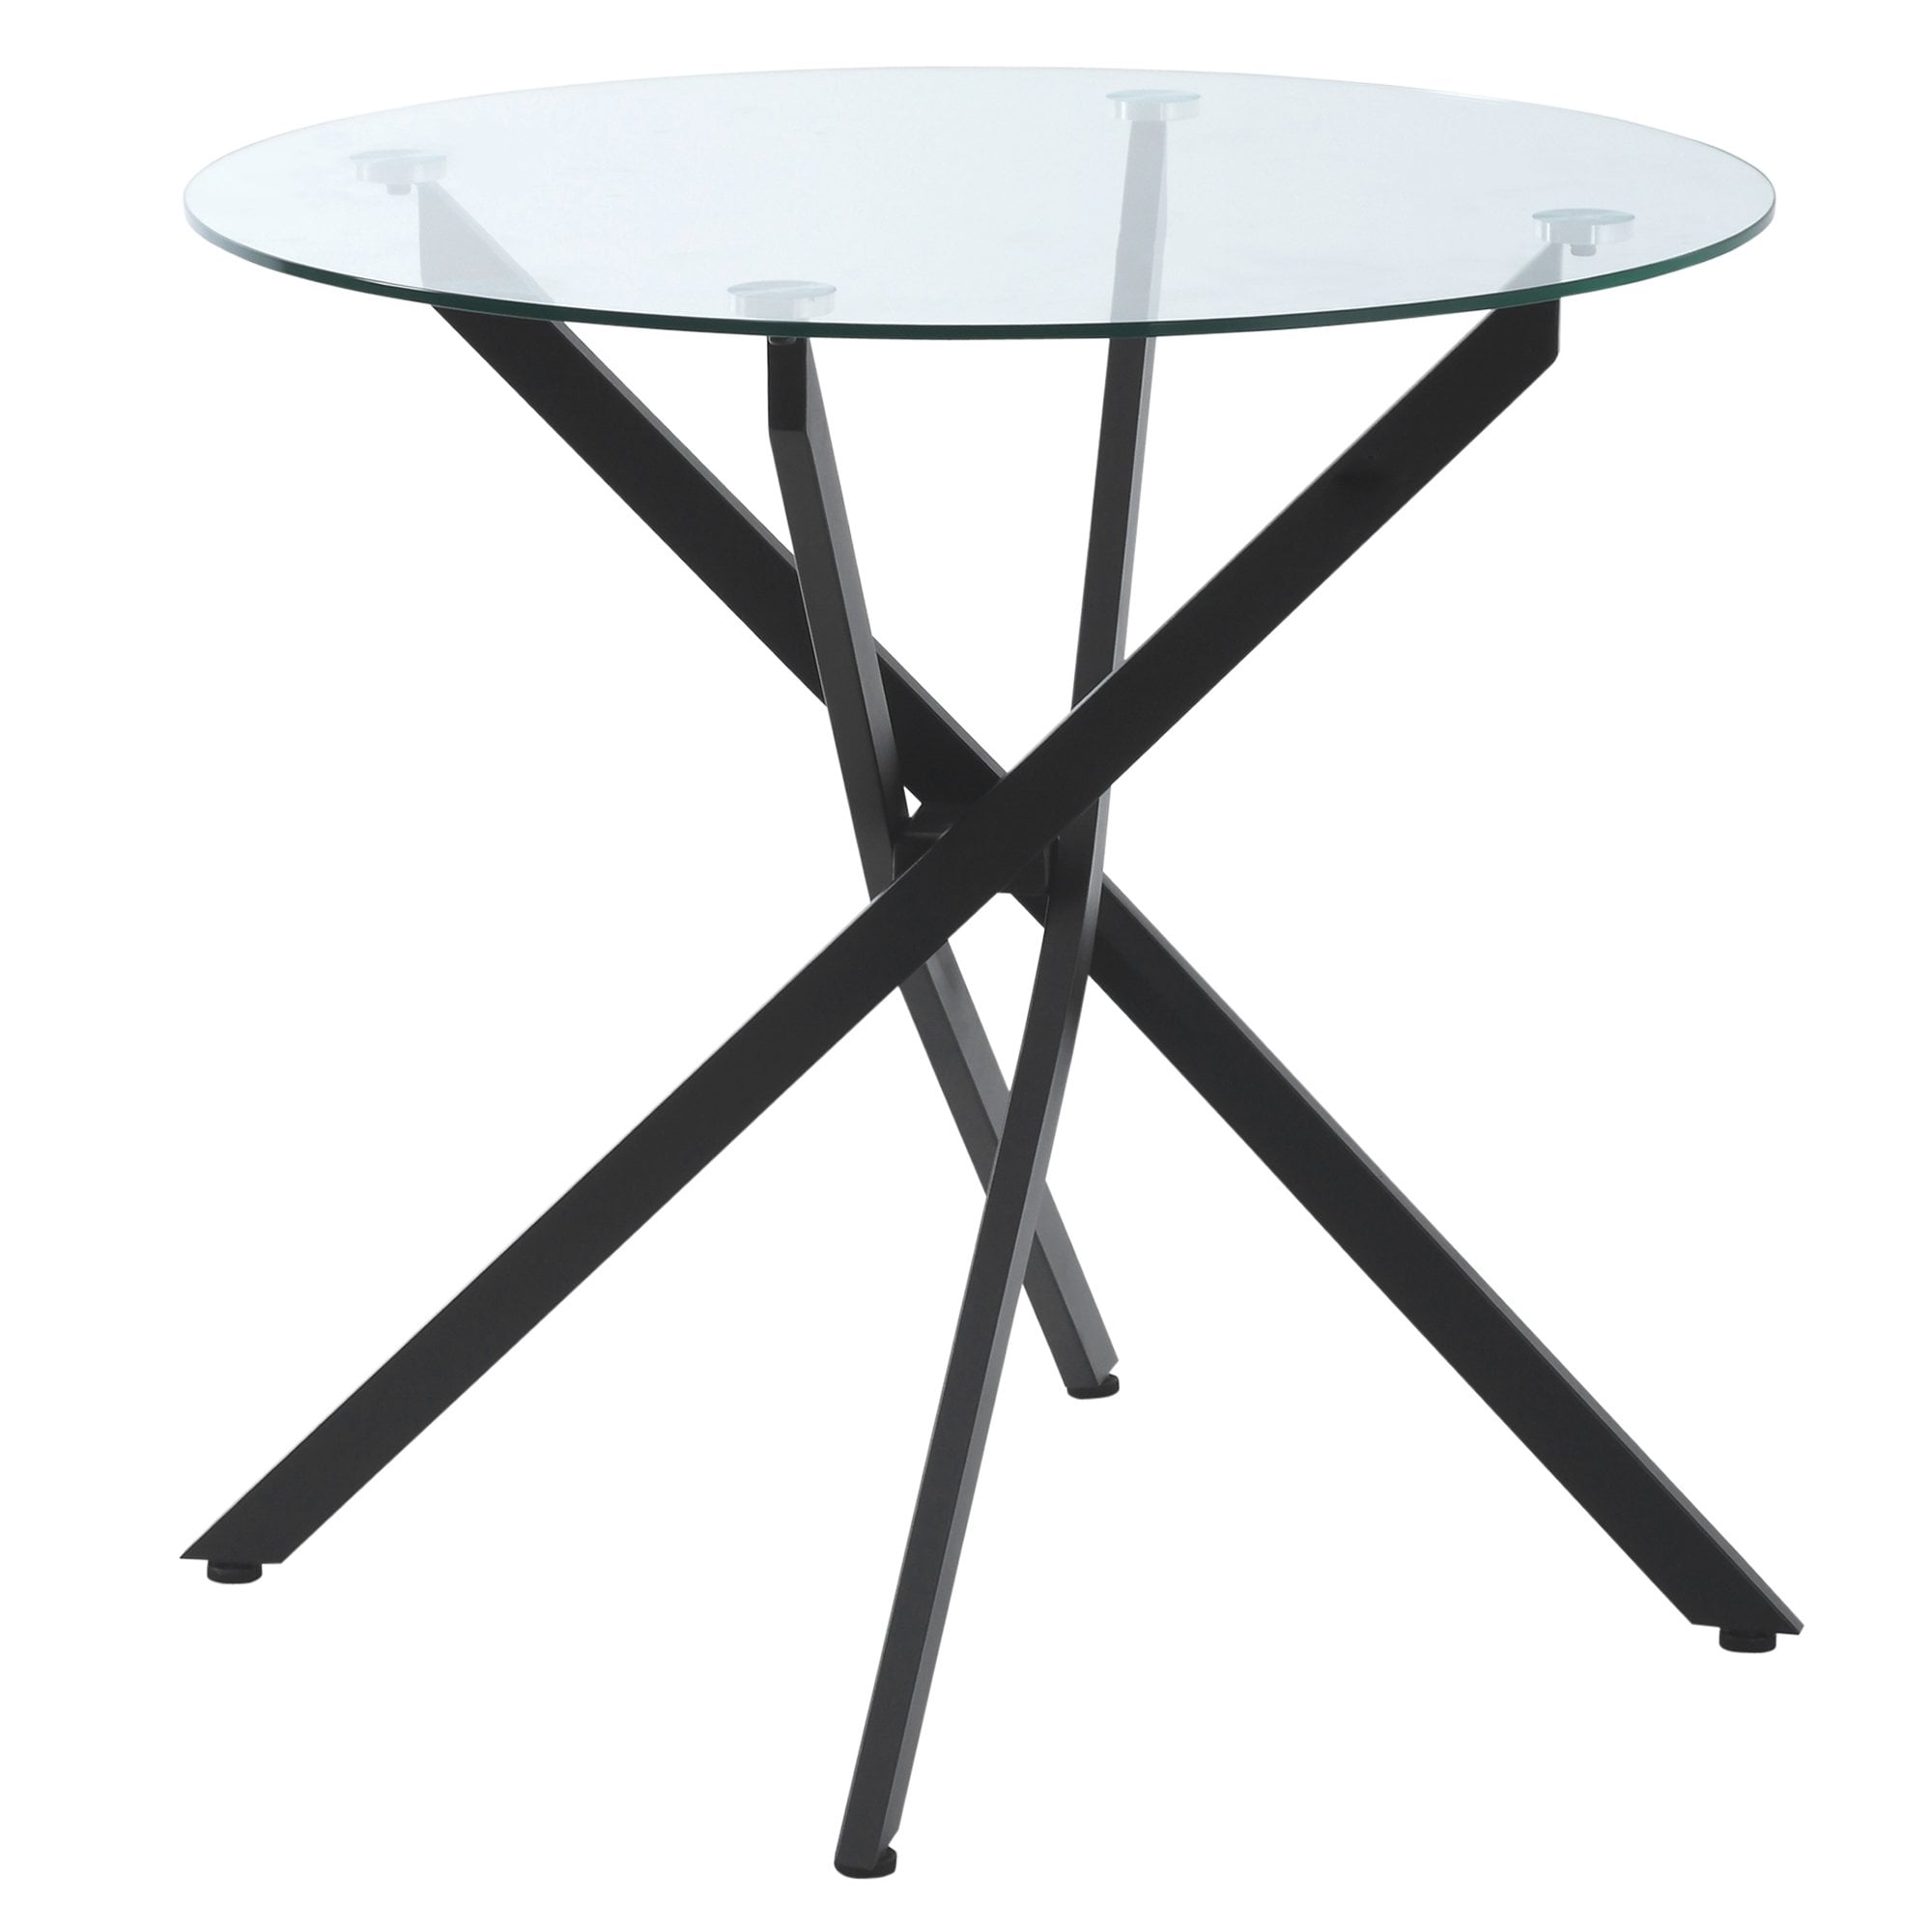 Side Table with Clear Tempered Glass Top - Round Table with Metal Legs - Modern Dining Table Furniture for Dining Room Living Room - Black Top & Legs